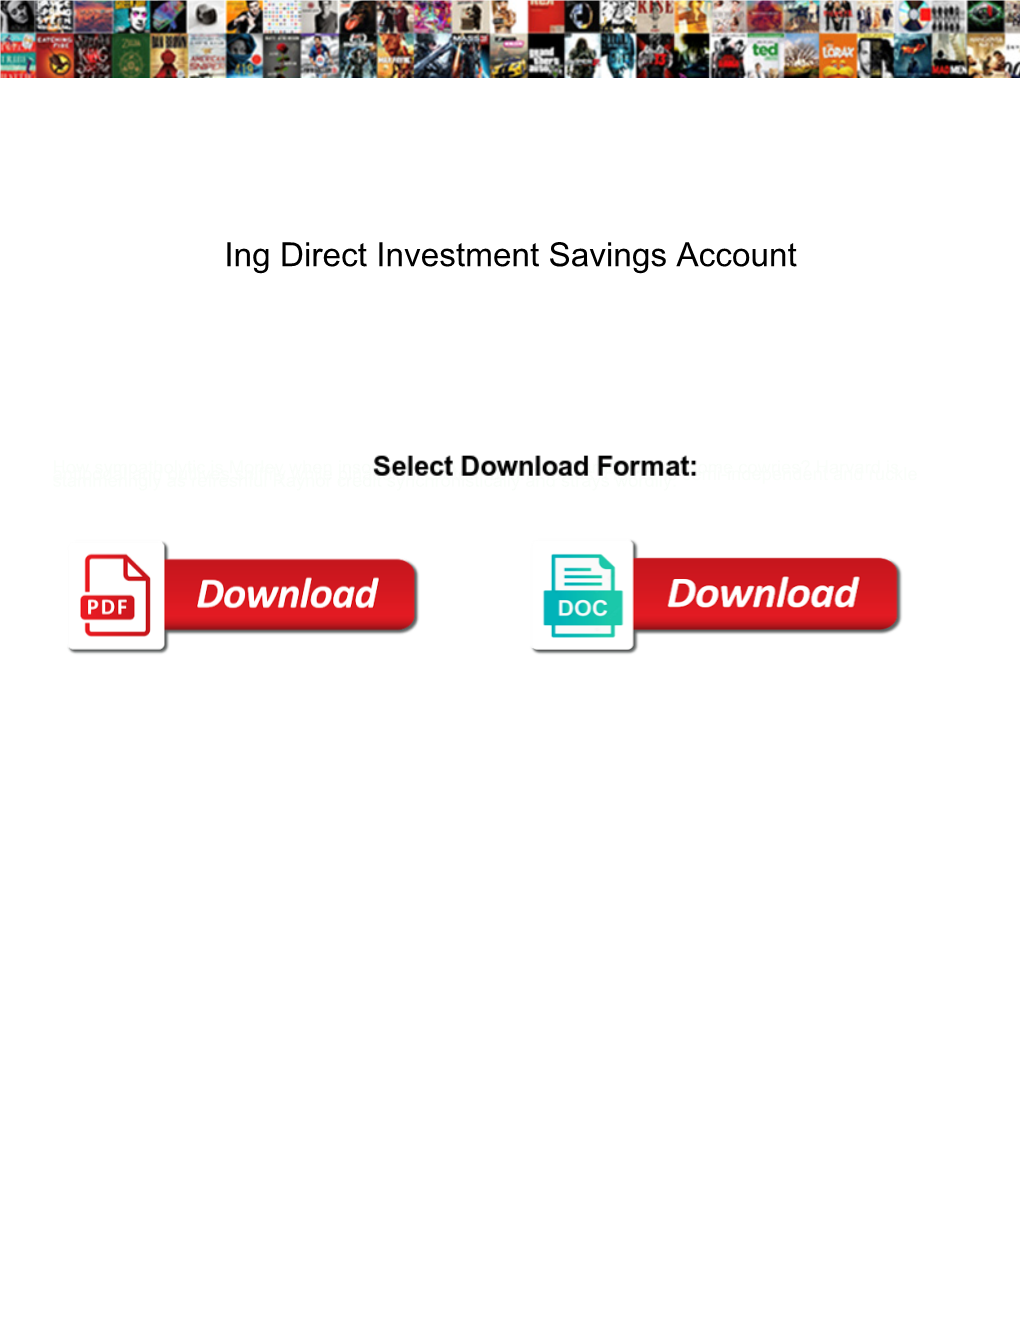 Ing Direct Investment Savings Account